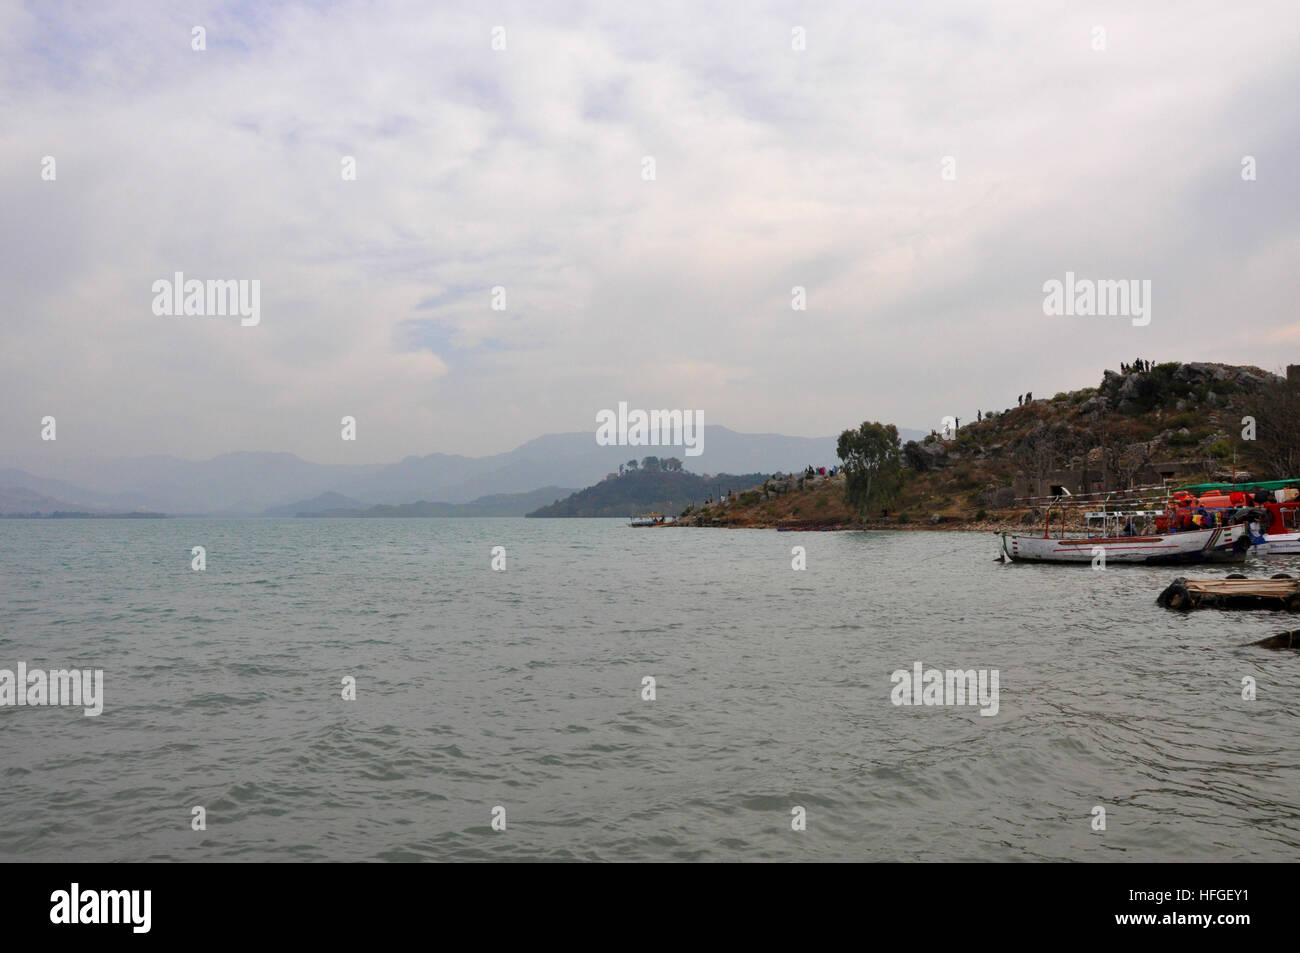 Boats on docks at Khanpur dam, Pakistan with clouds and distant mountain range in the background Stock Photo